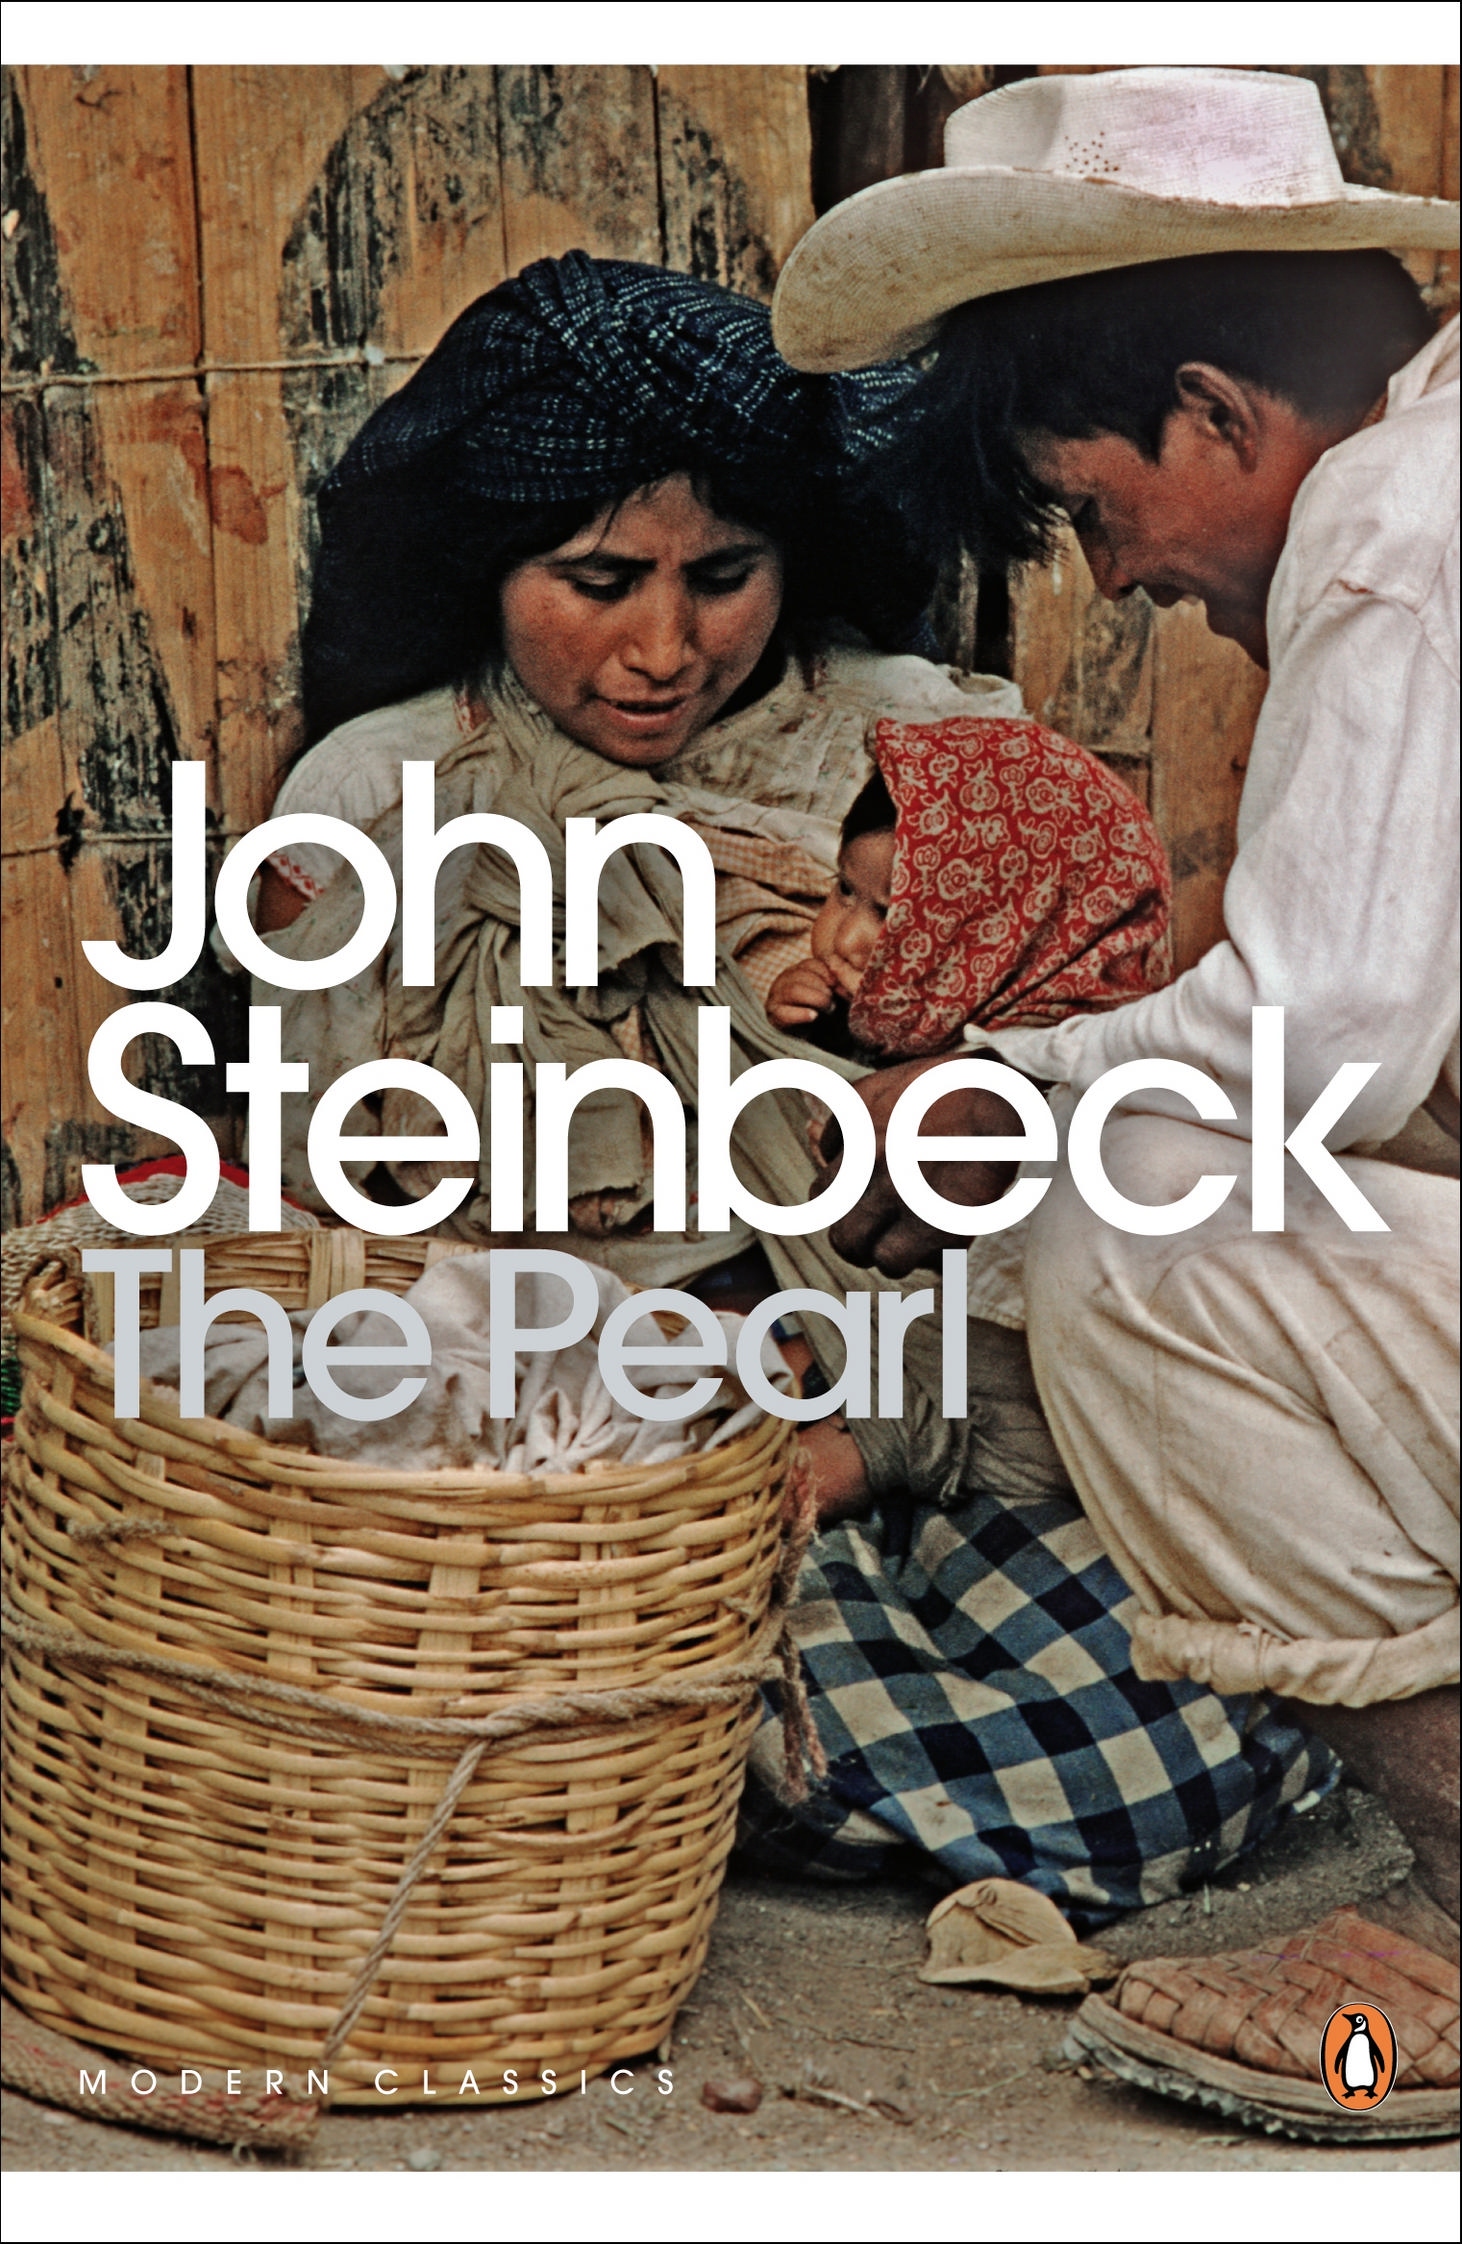 The Pearl by John Steinbeck, a Book Review